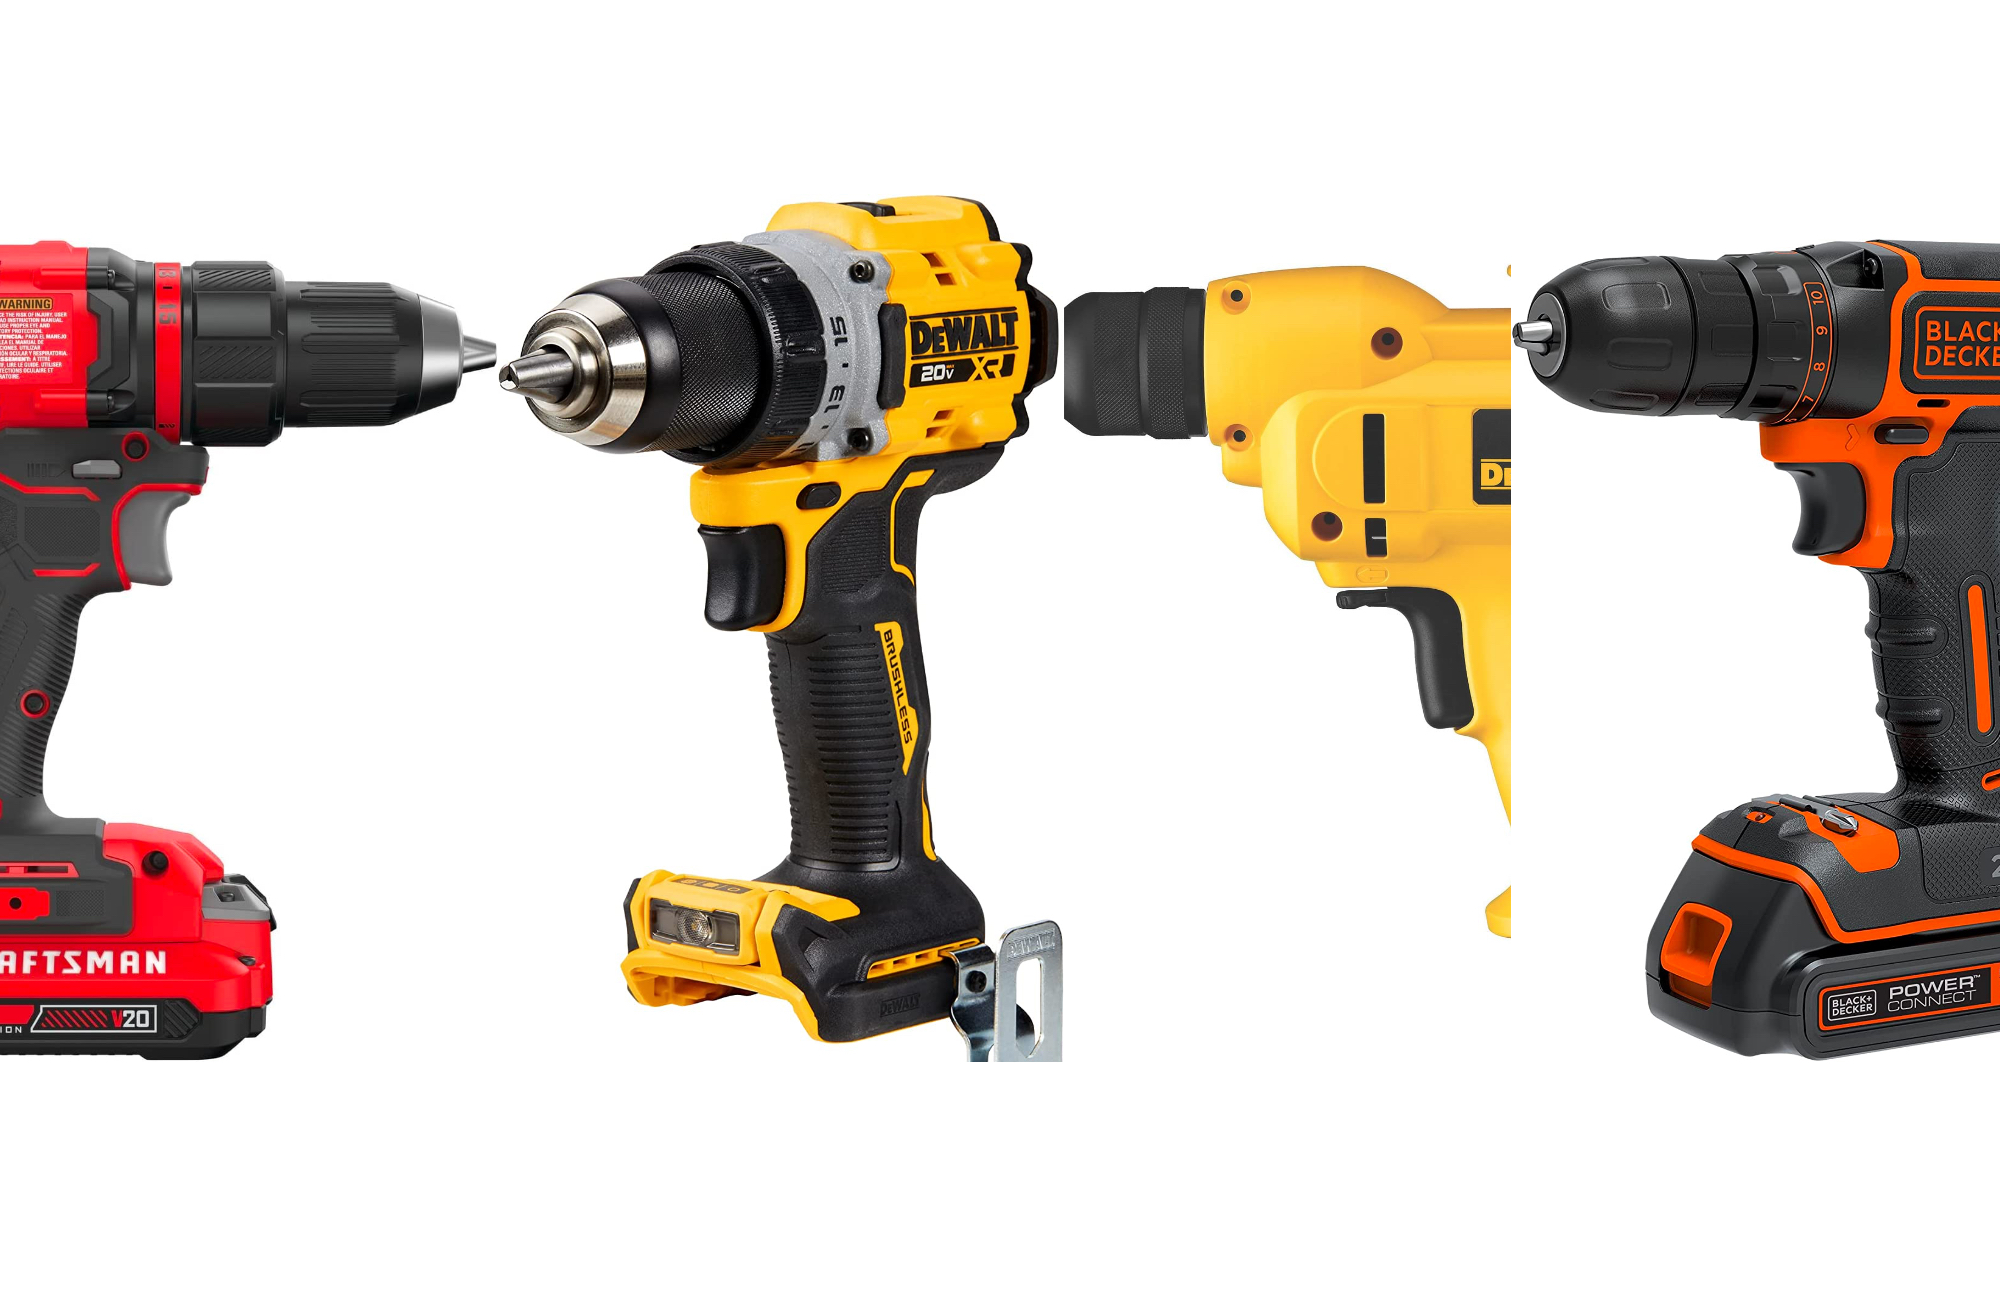 Every Major Power Tool Brand Ranked Worst To Best